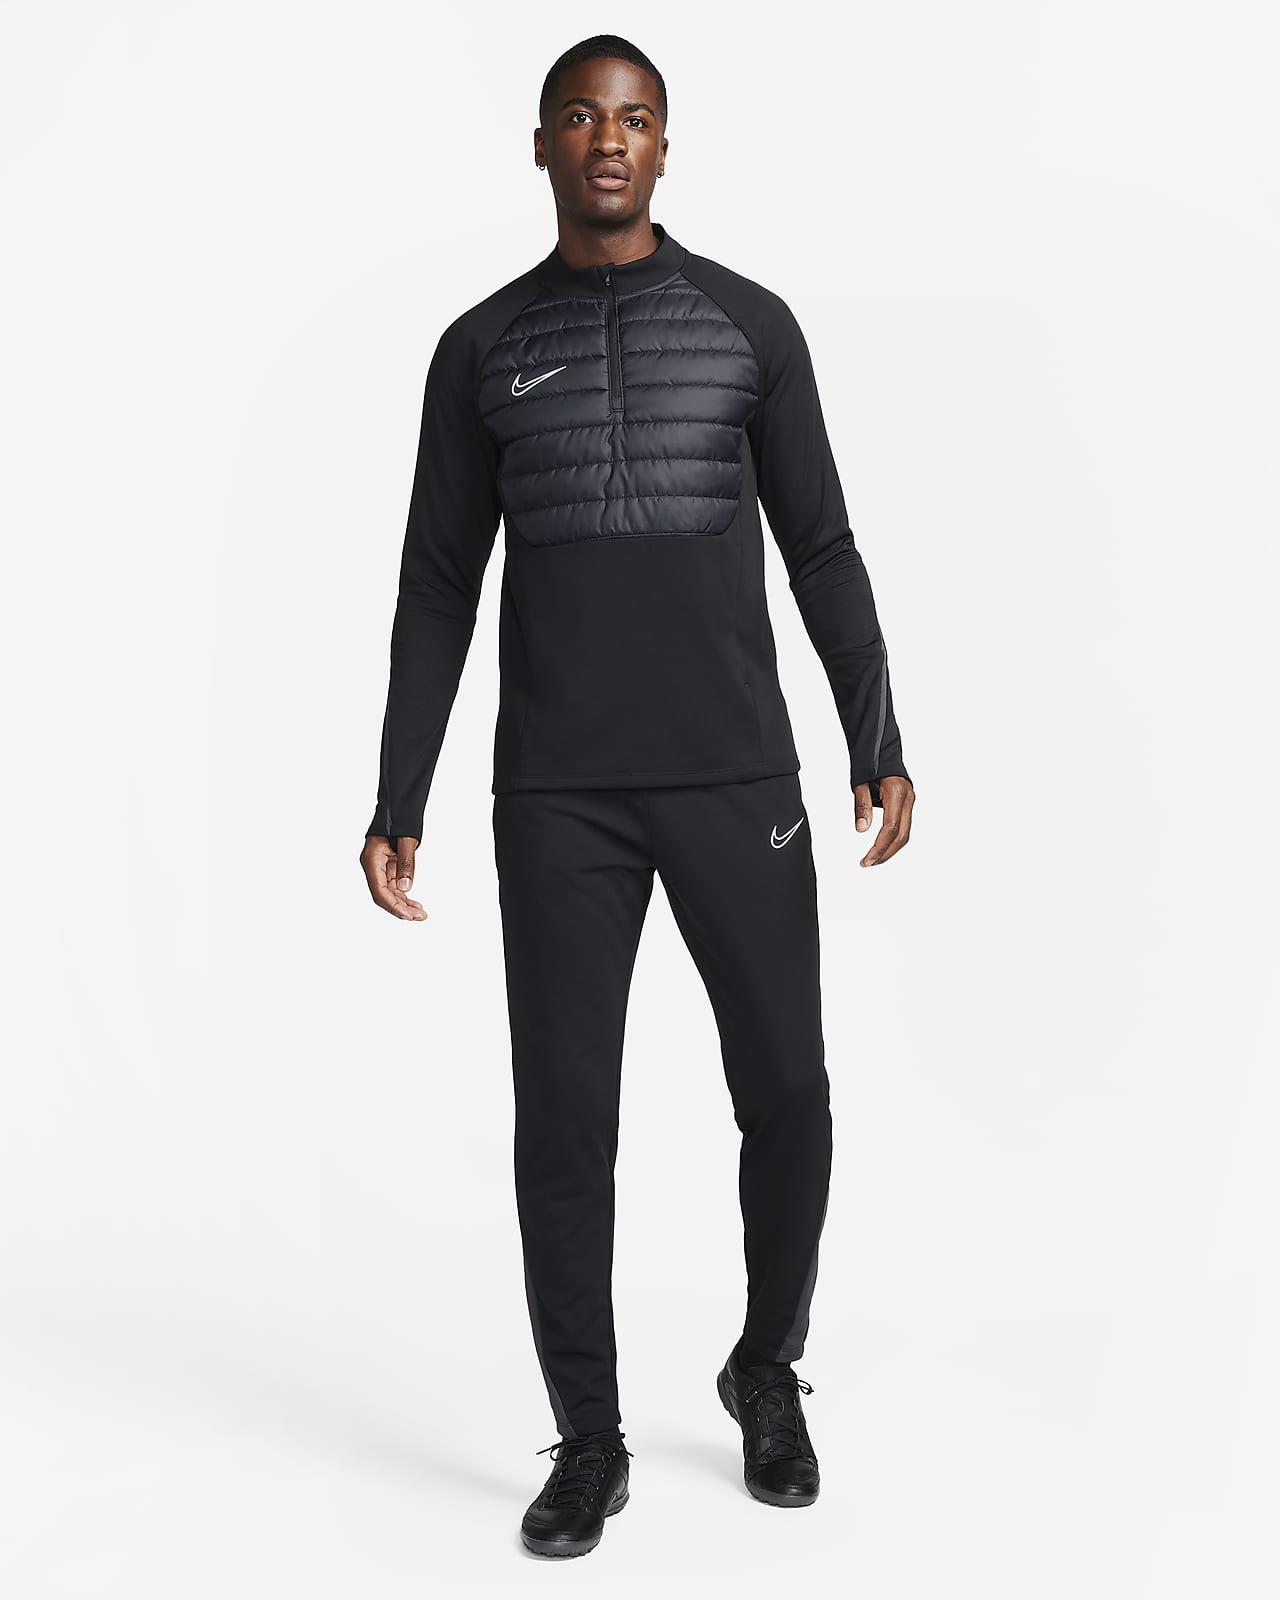 Pack Nike Winter Warrior pour Homme. Hiver